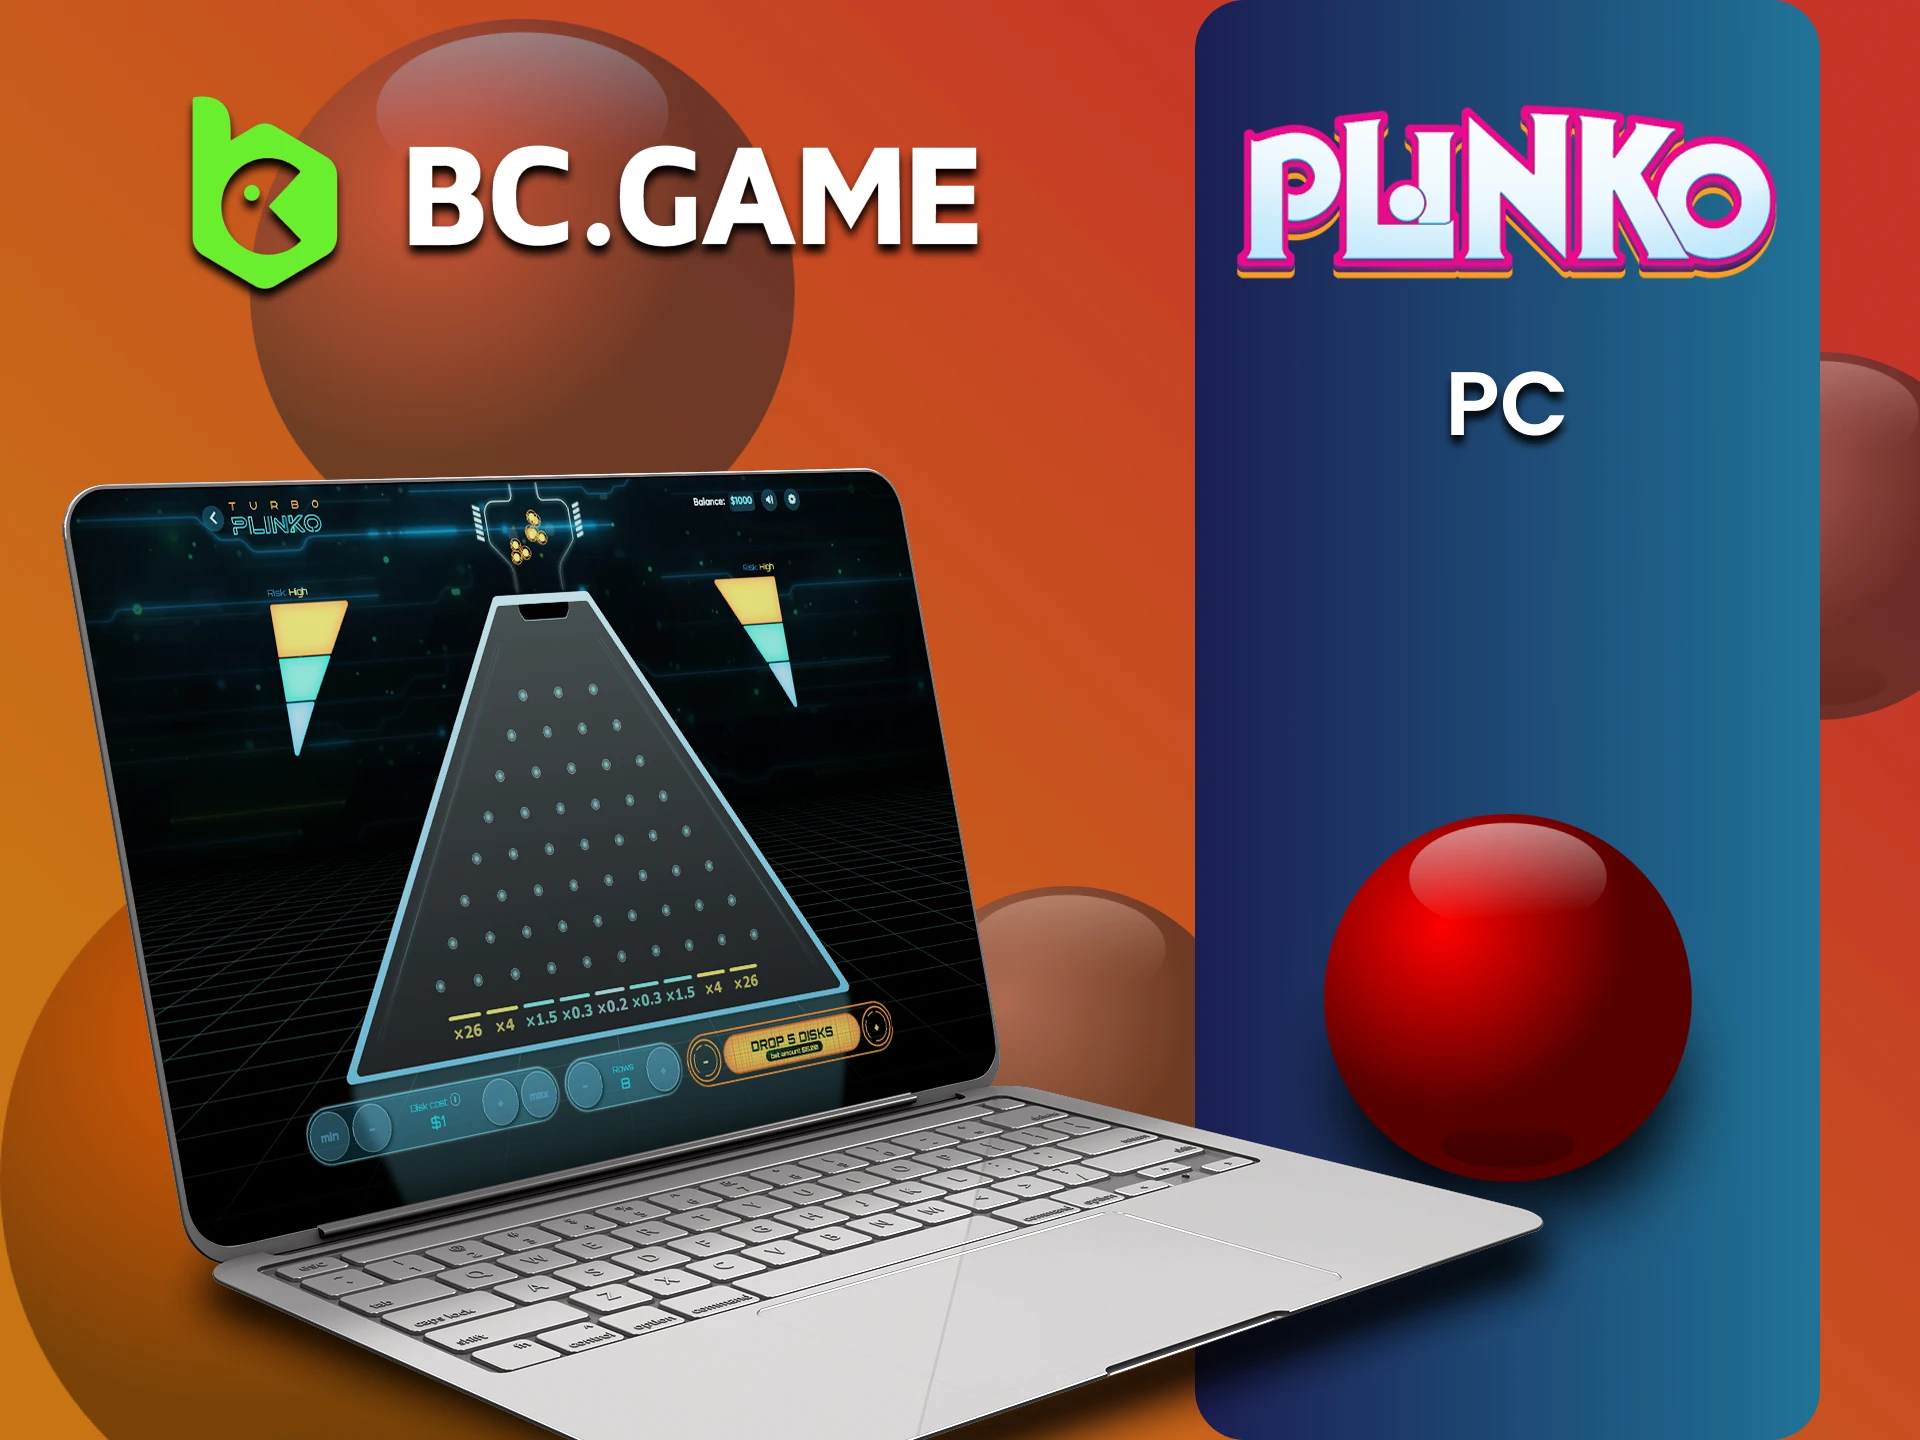 Use your PC to play Plinko on BCGame.